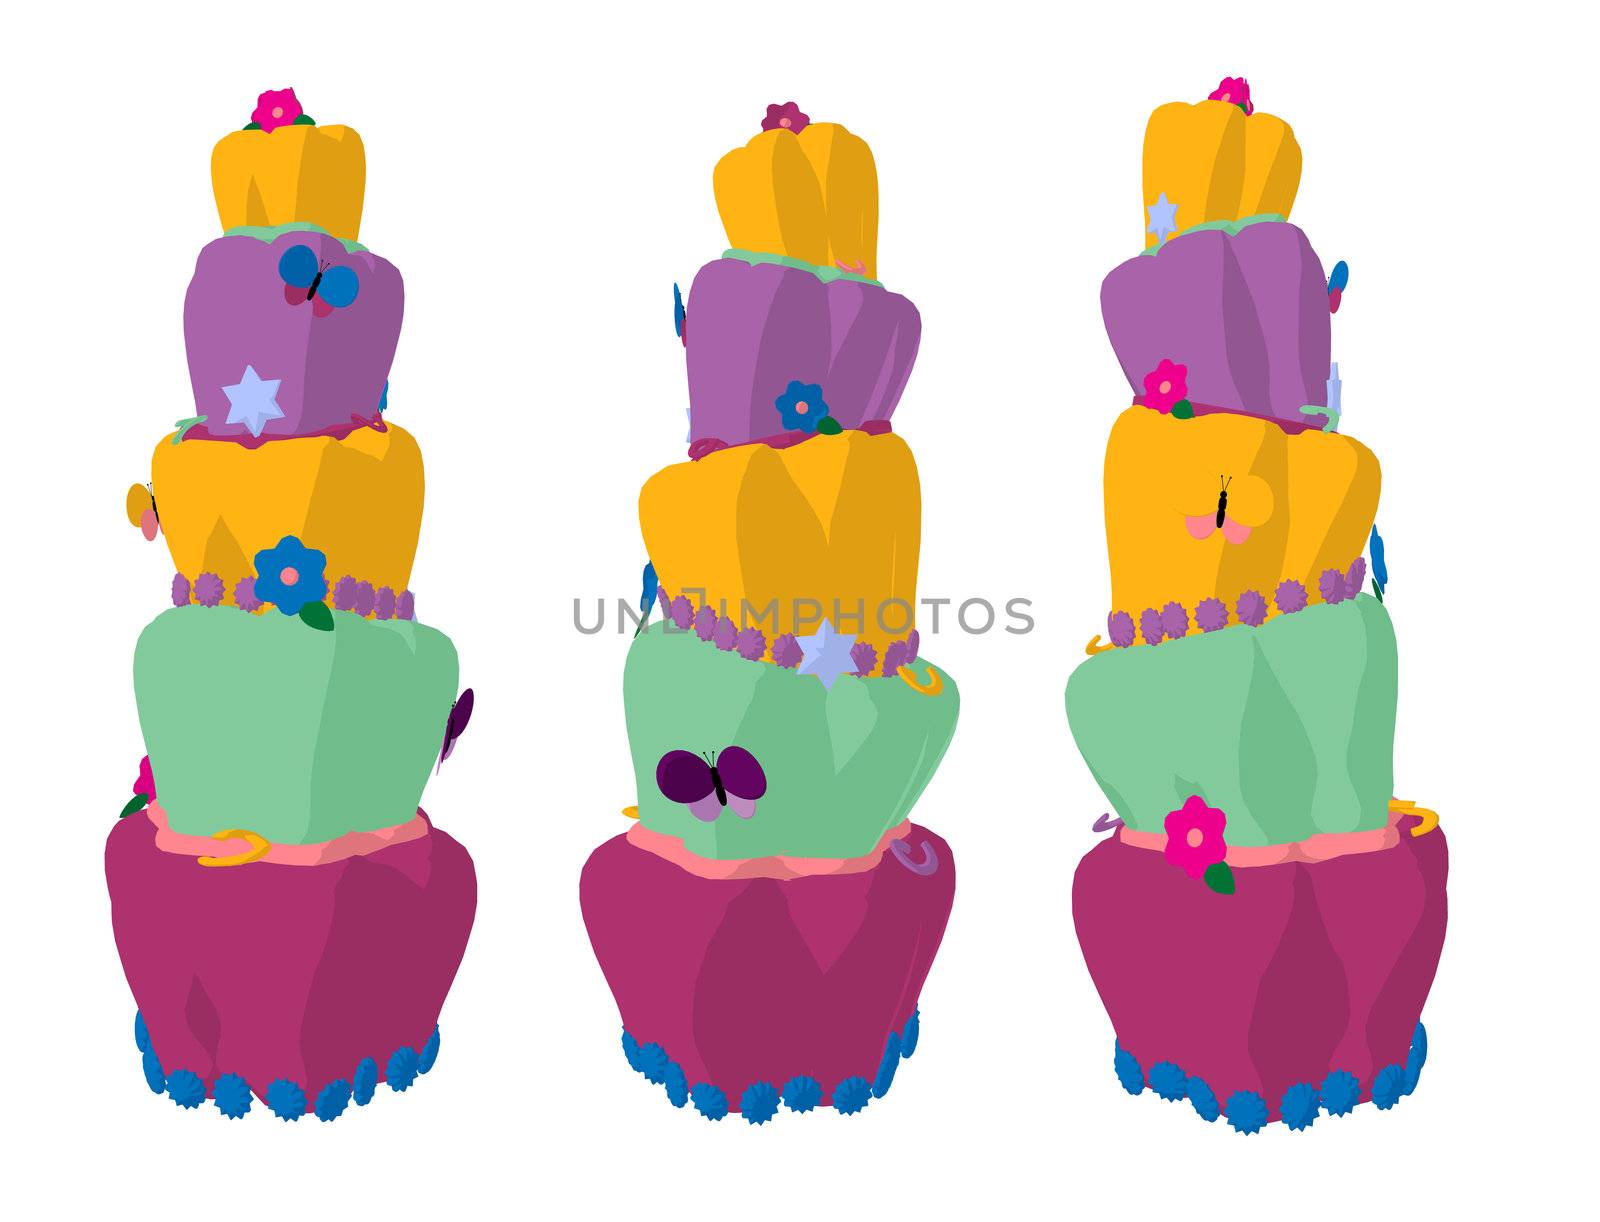 Three big colorful cakes on a white background